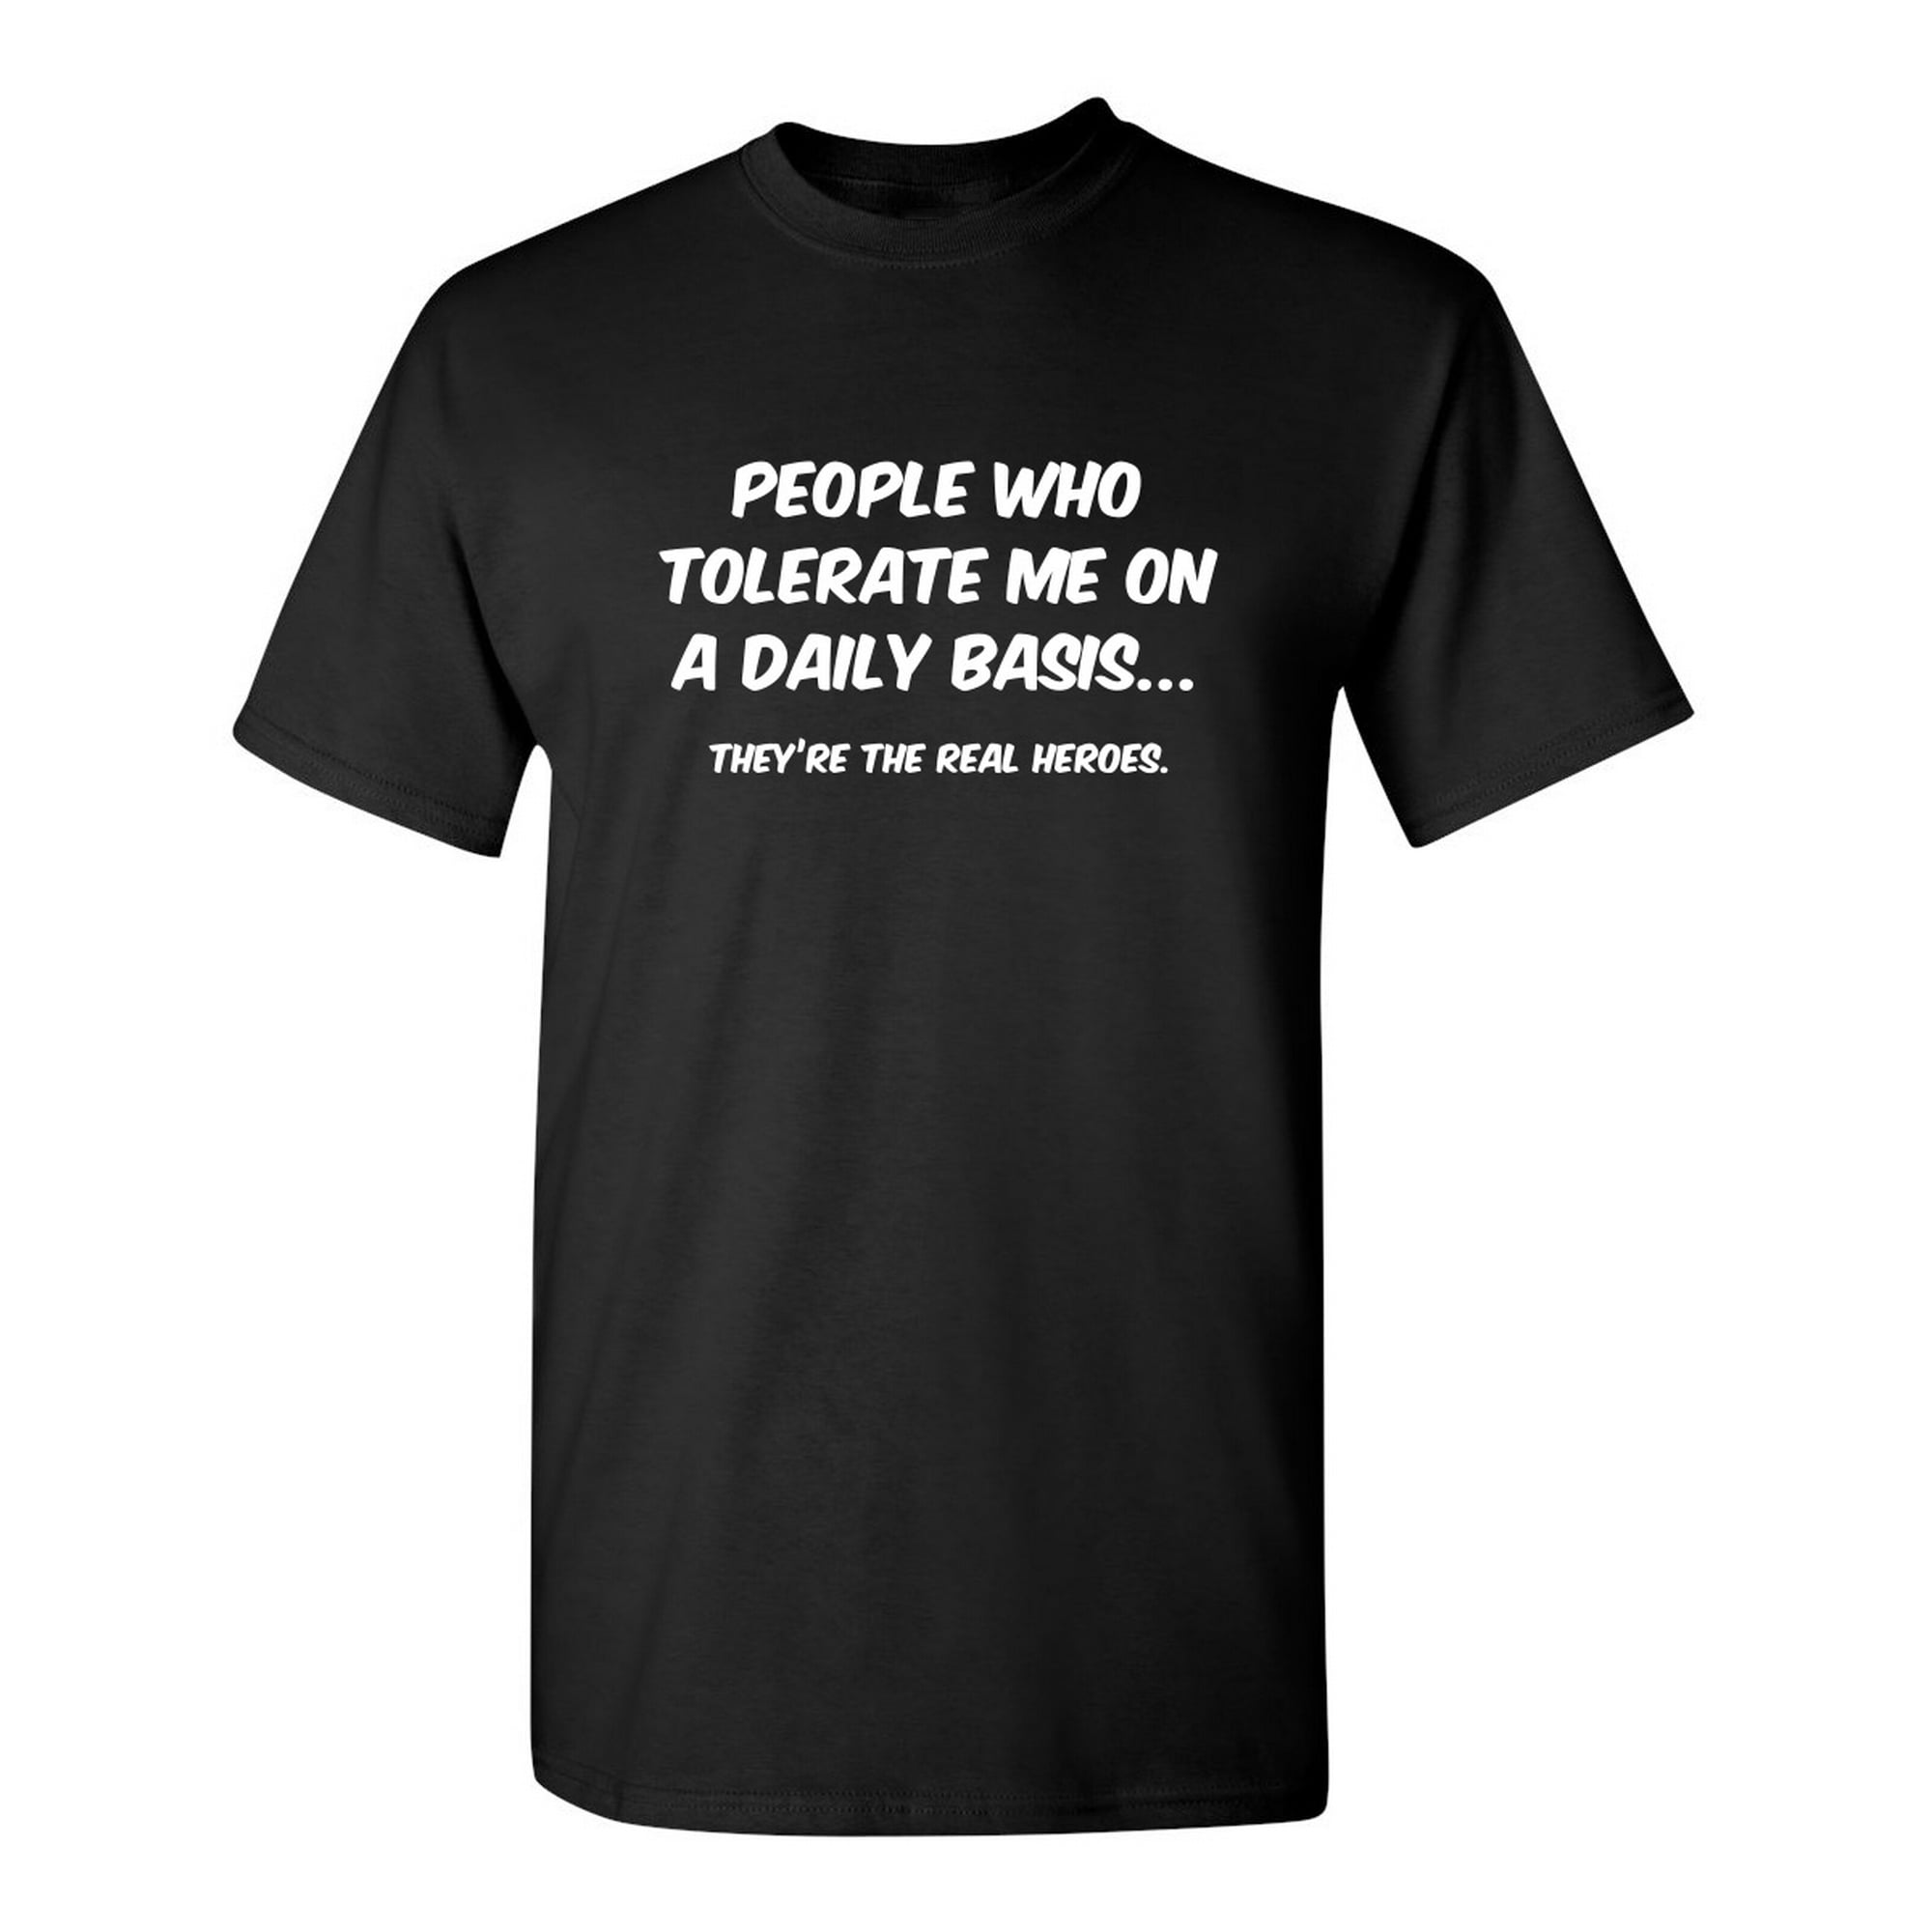 Who Tolerate Me On A Daily Basis Sarcastic Funny Graphic T Shirt Adult Humor Fit Well Tee Apparel Gift Birthday Anniversary Novelty Premium Tshirt - Walmart.com